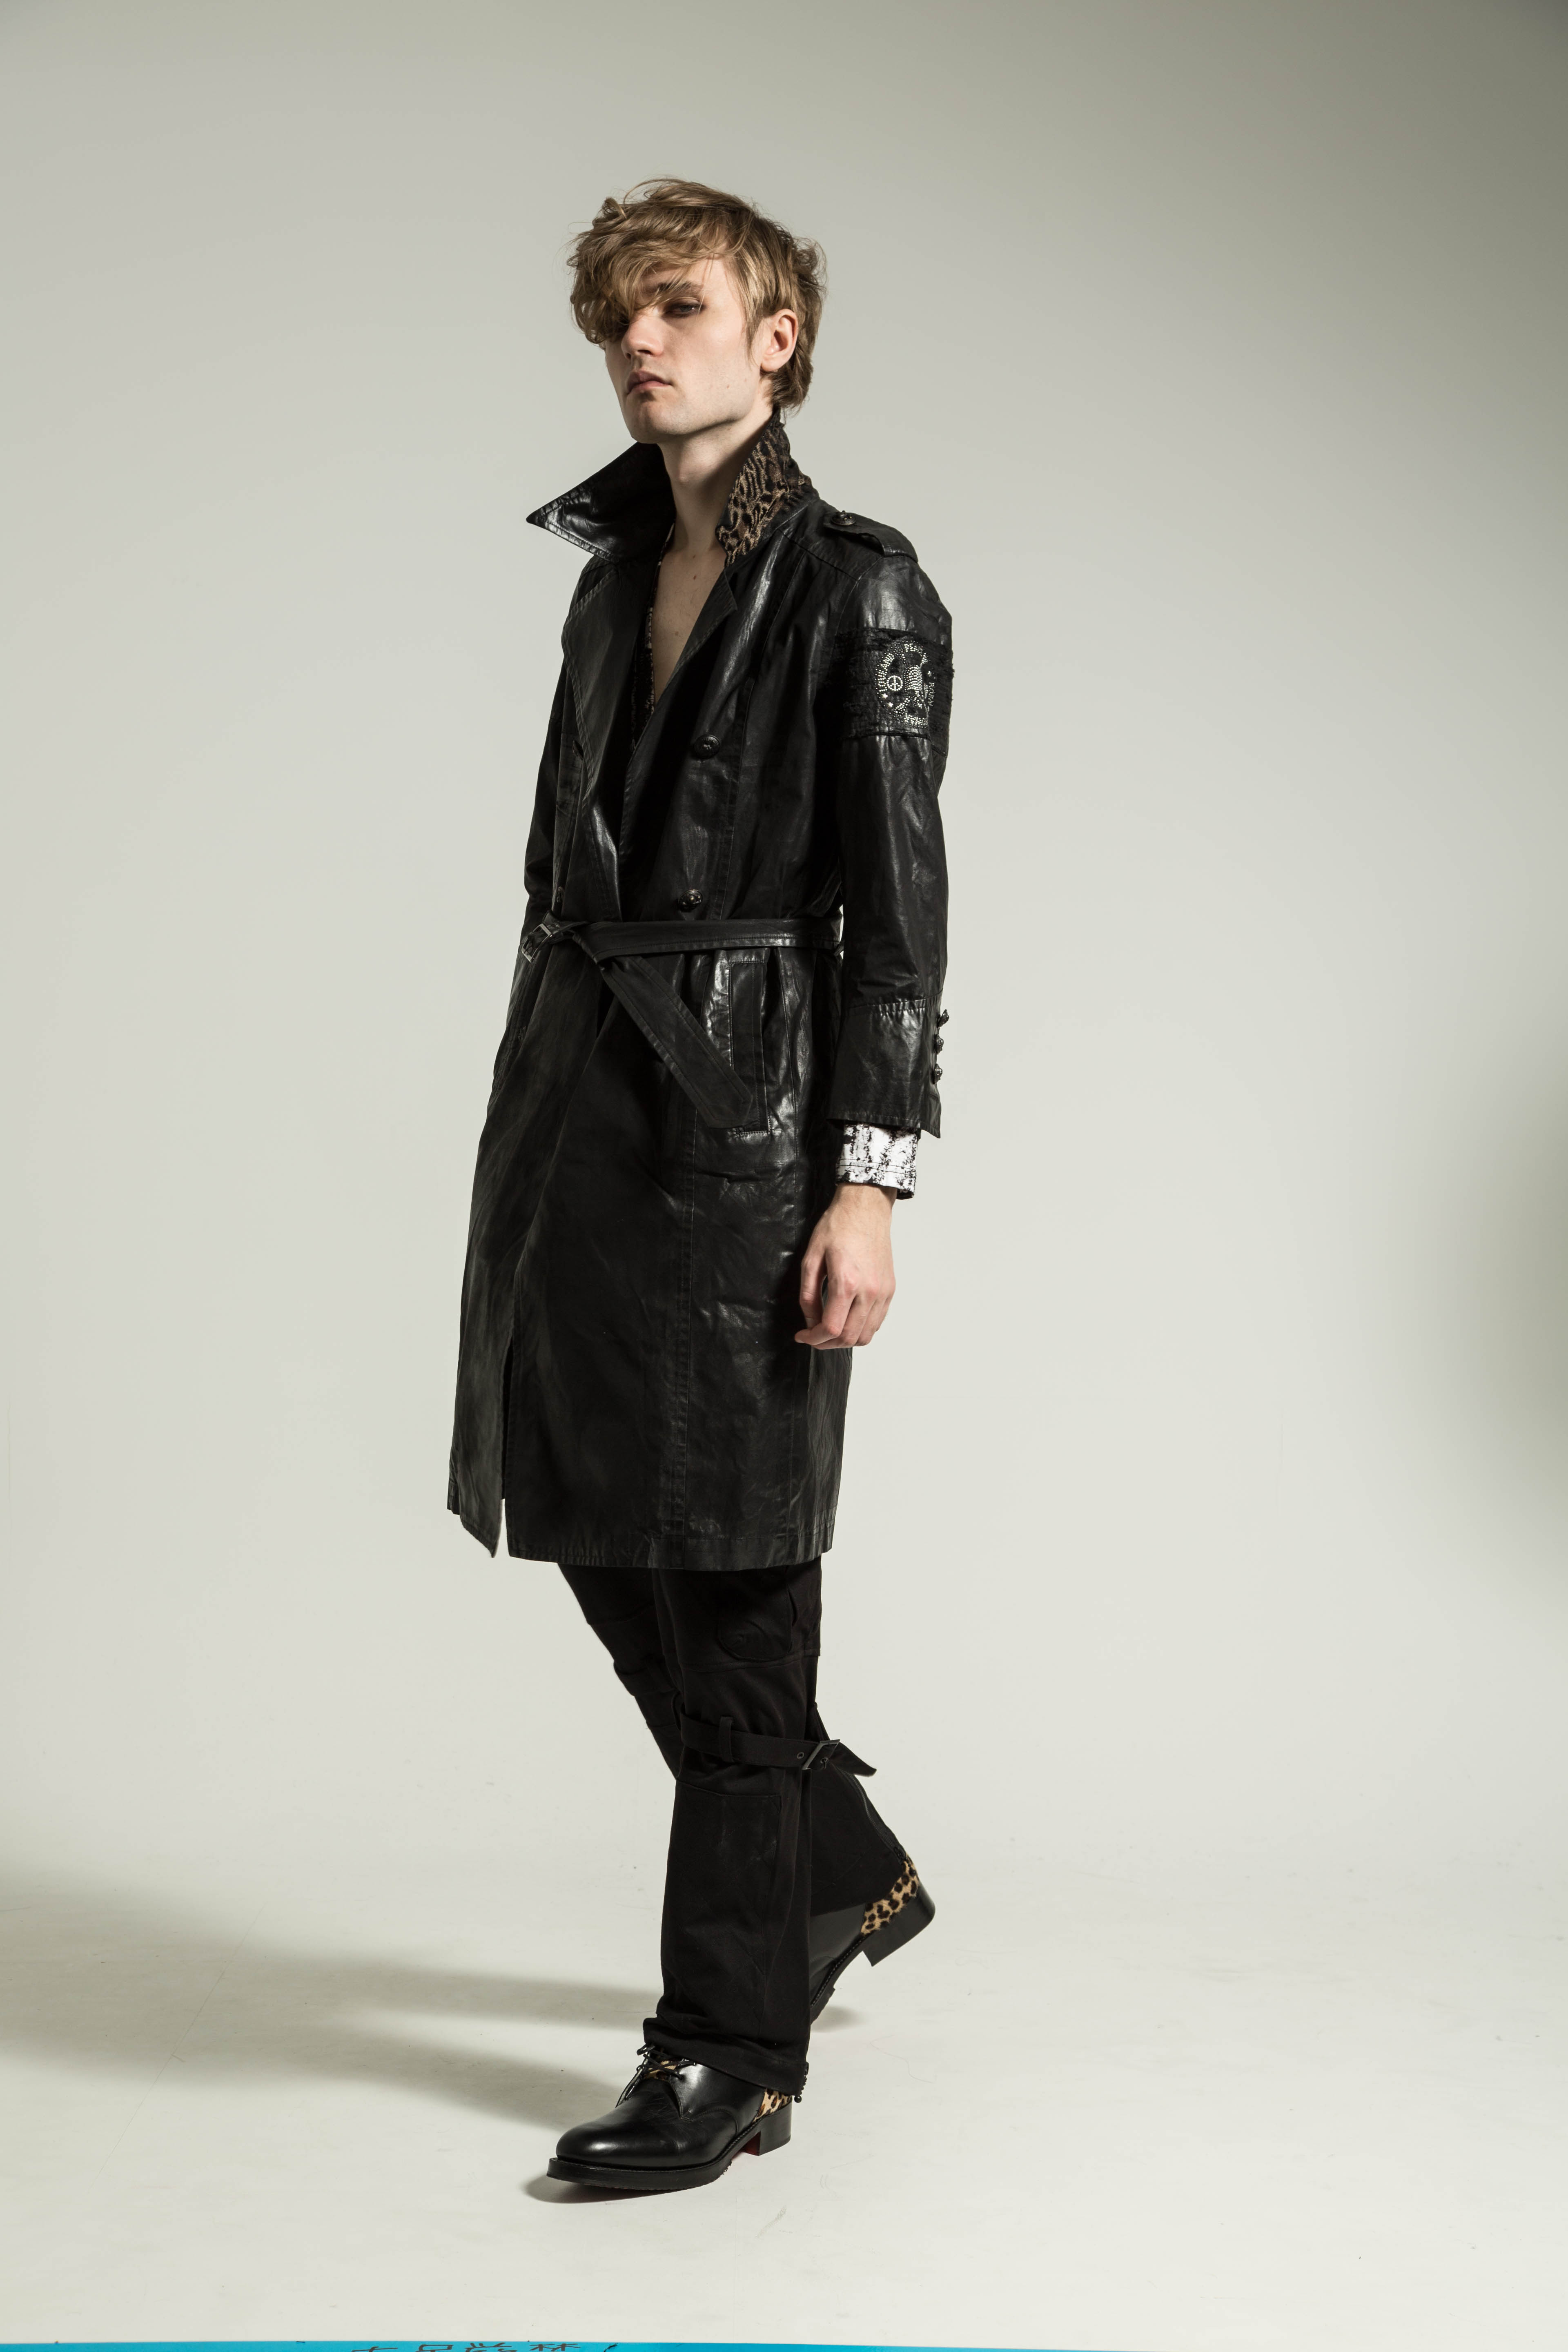 Roen『Coating Trench Coat』初秋から着れるライトアウターのトレンチコート2017-18AW collection